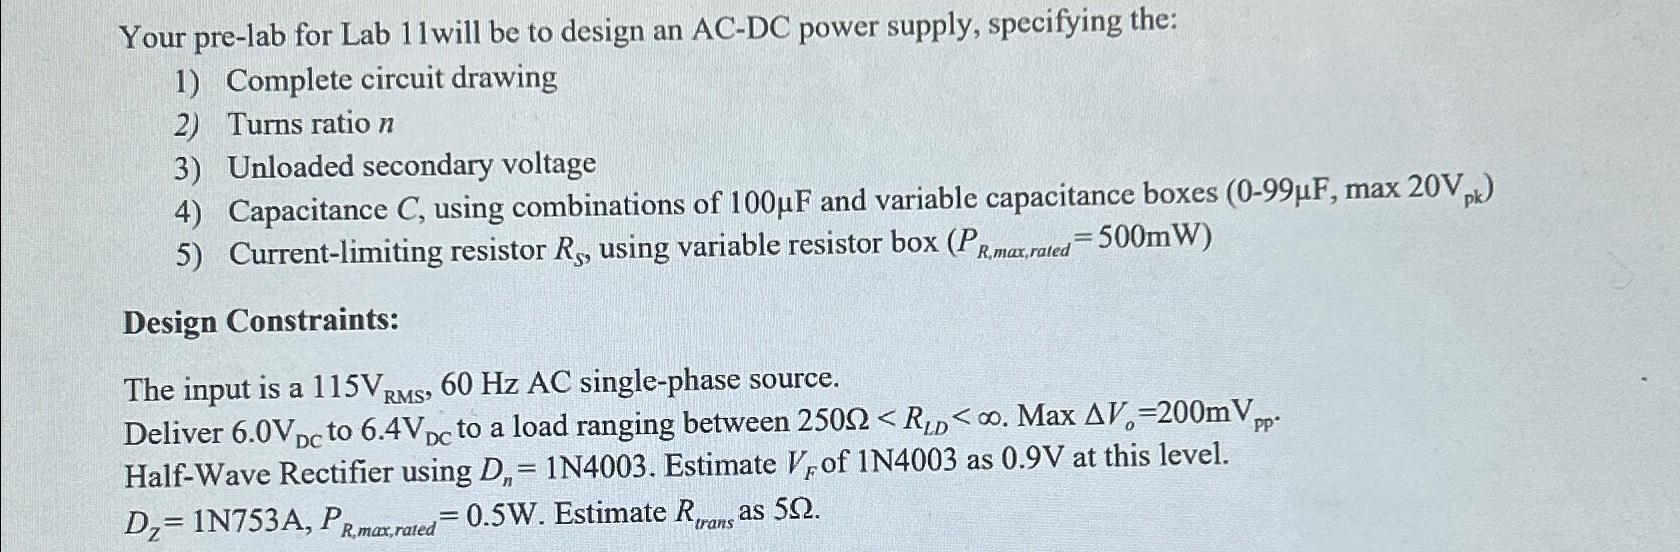 Your pre-lab for Lab 11 will be to design an AC-DC power supply, specifying the: 1) Complete circuit drawing